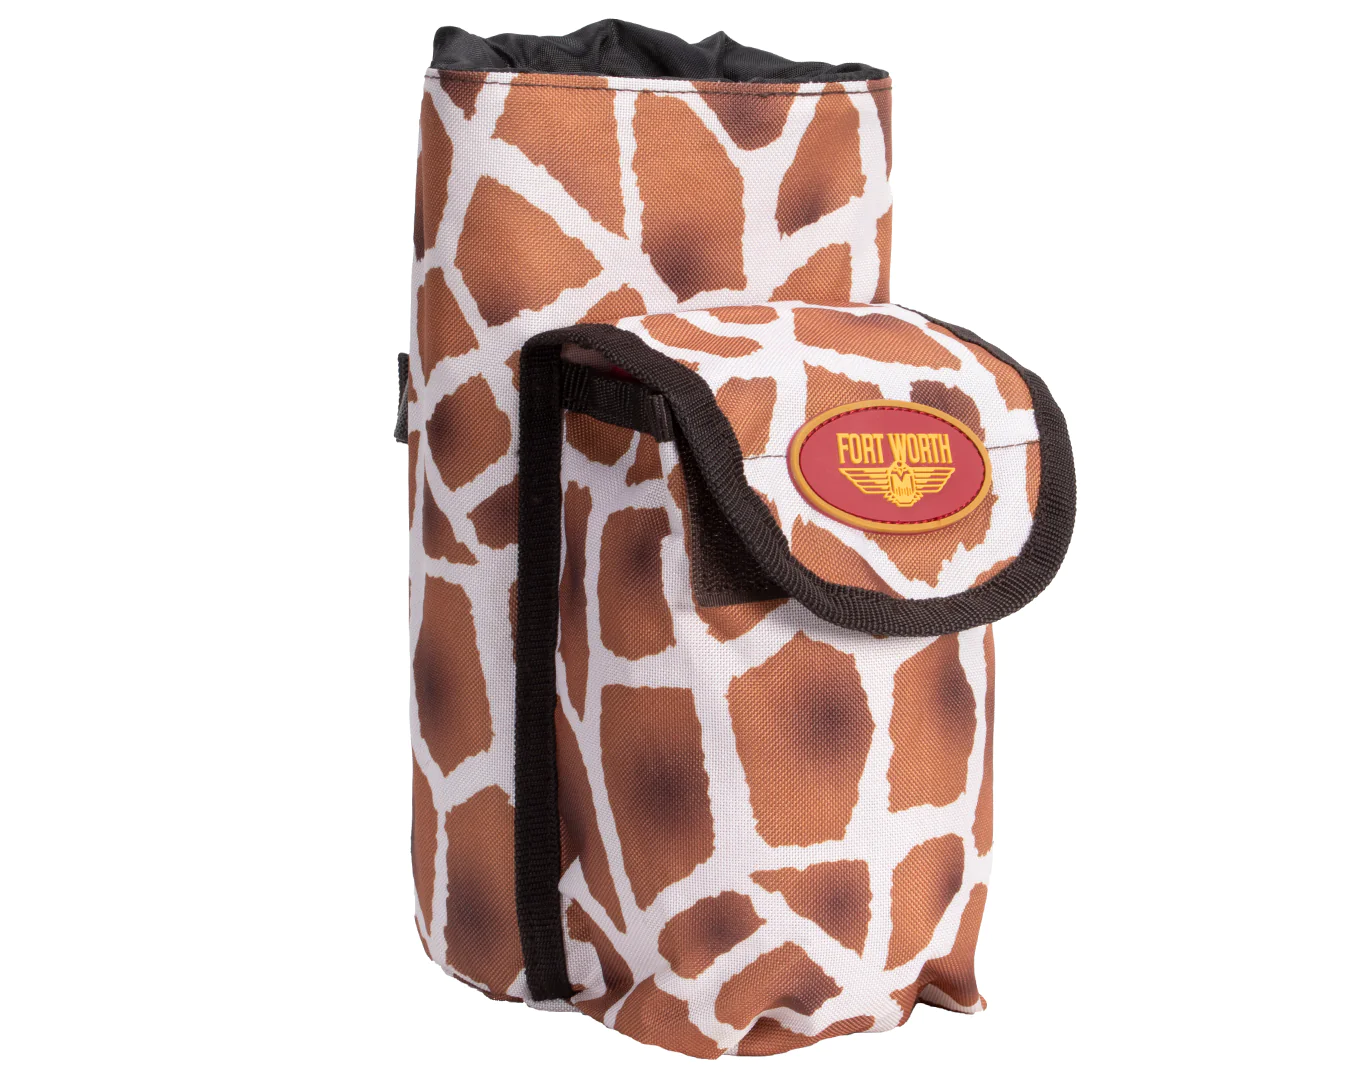 Fort Worth Bottle/Saddle Bag With Pouch Giraffe – Limited Edition